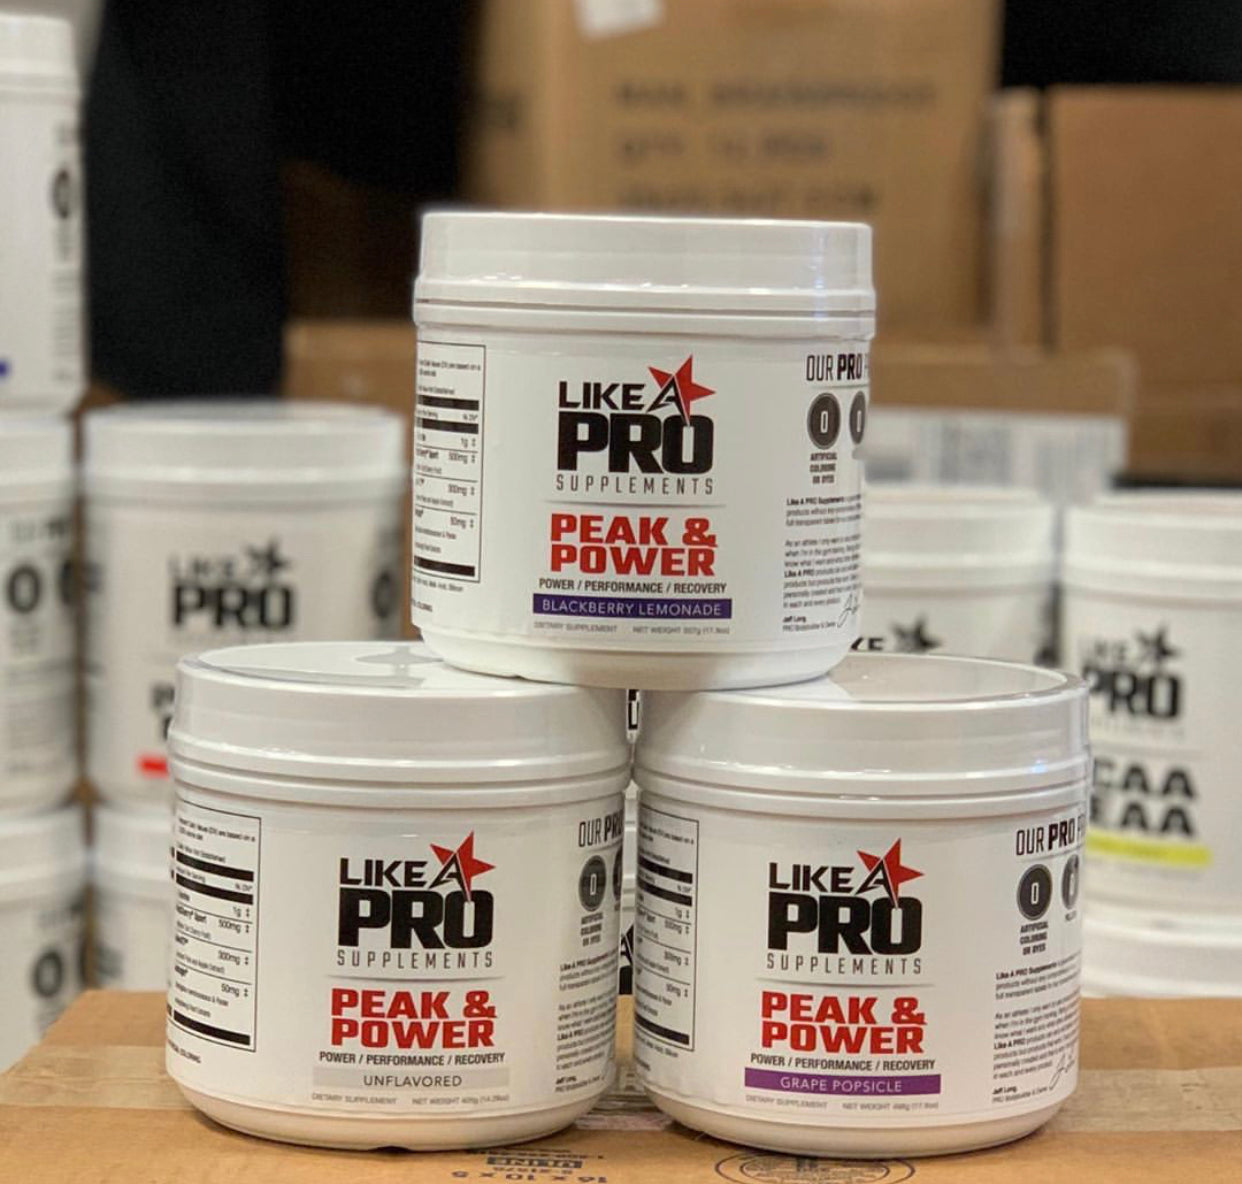 Like A Pro Supplements - Peak & Power - Overview